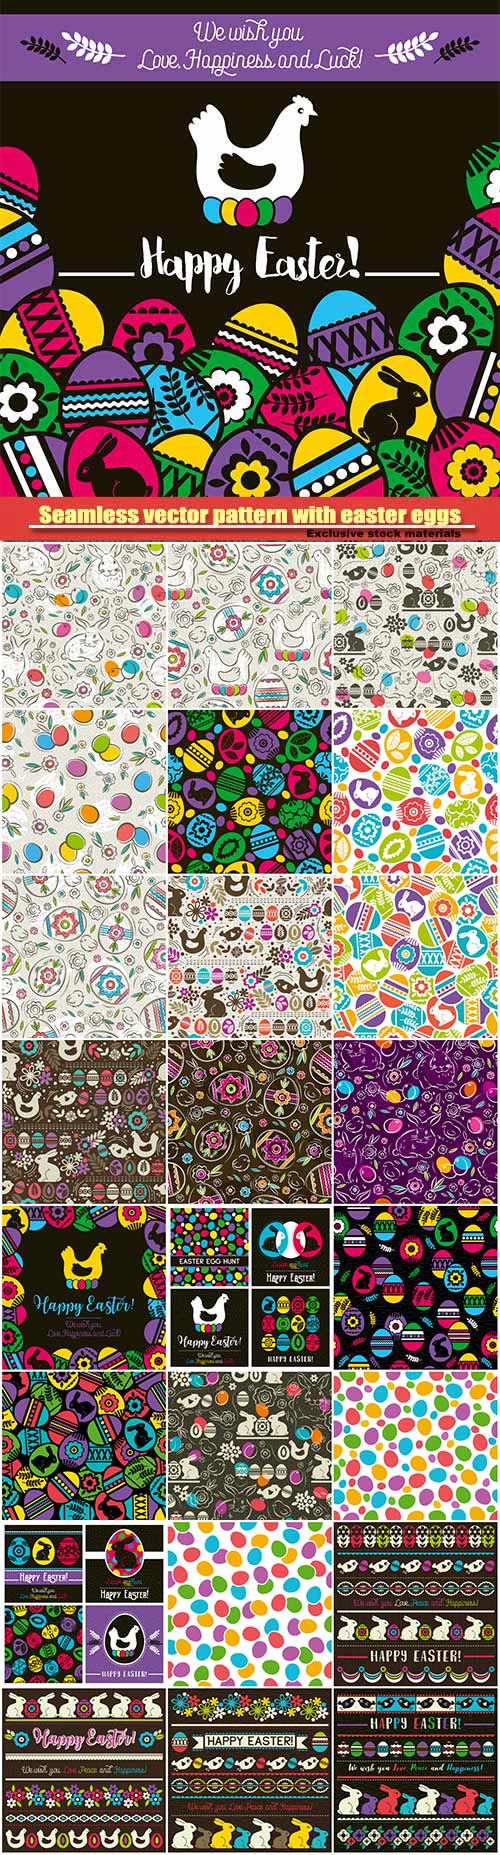 Seamless vector pattern with color easter eggs, flowers and rabbit